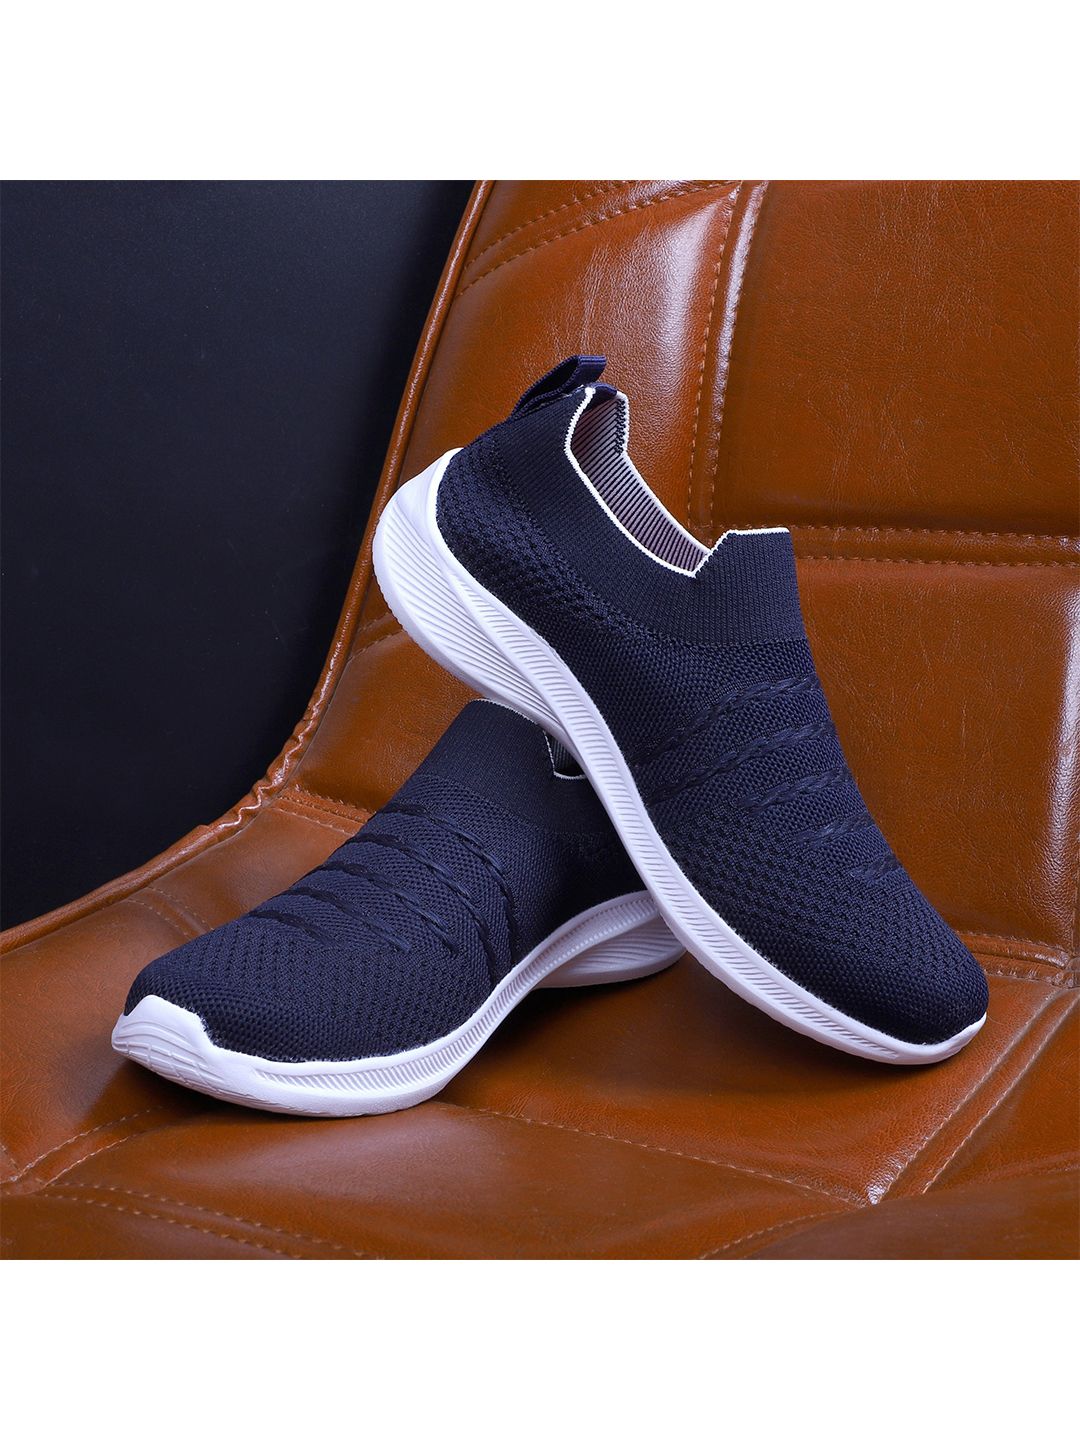 TPENT Women Navy Blue Mesh Running Non-Marking Shoes Price in India